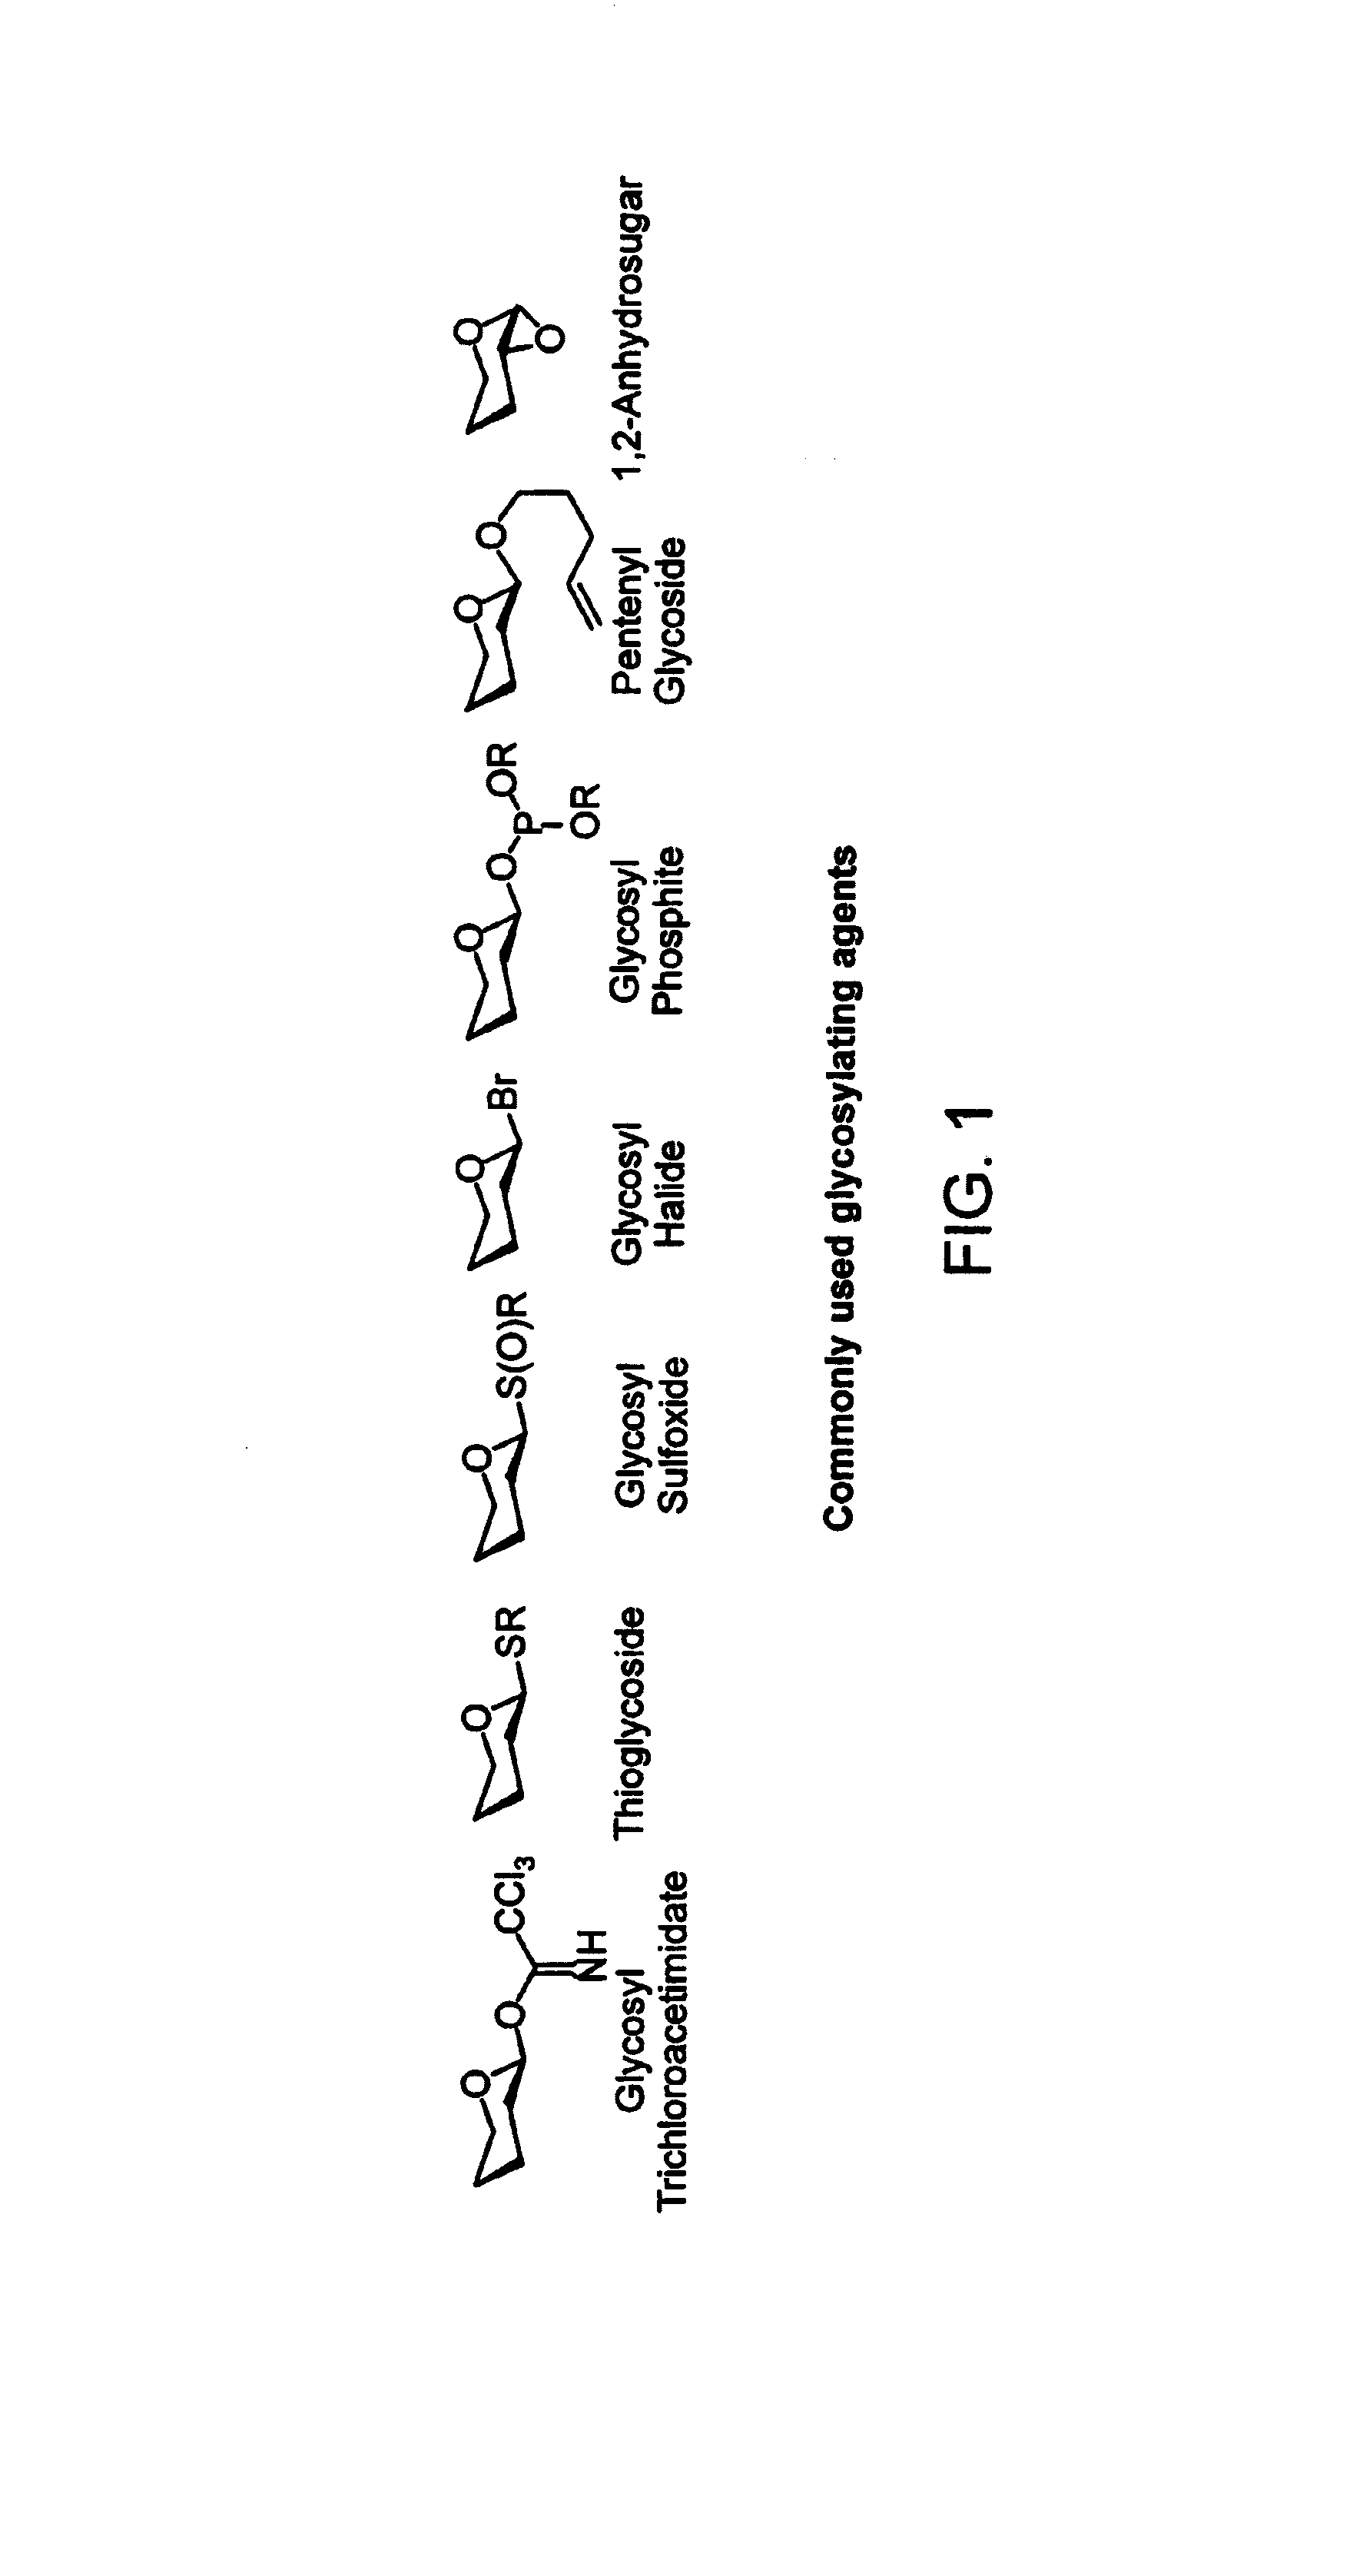 Apparatus and methods for the automated synthesis of oligosaccharides